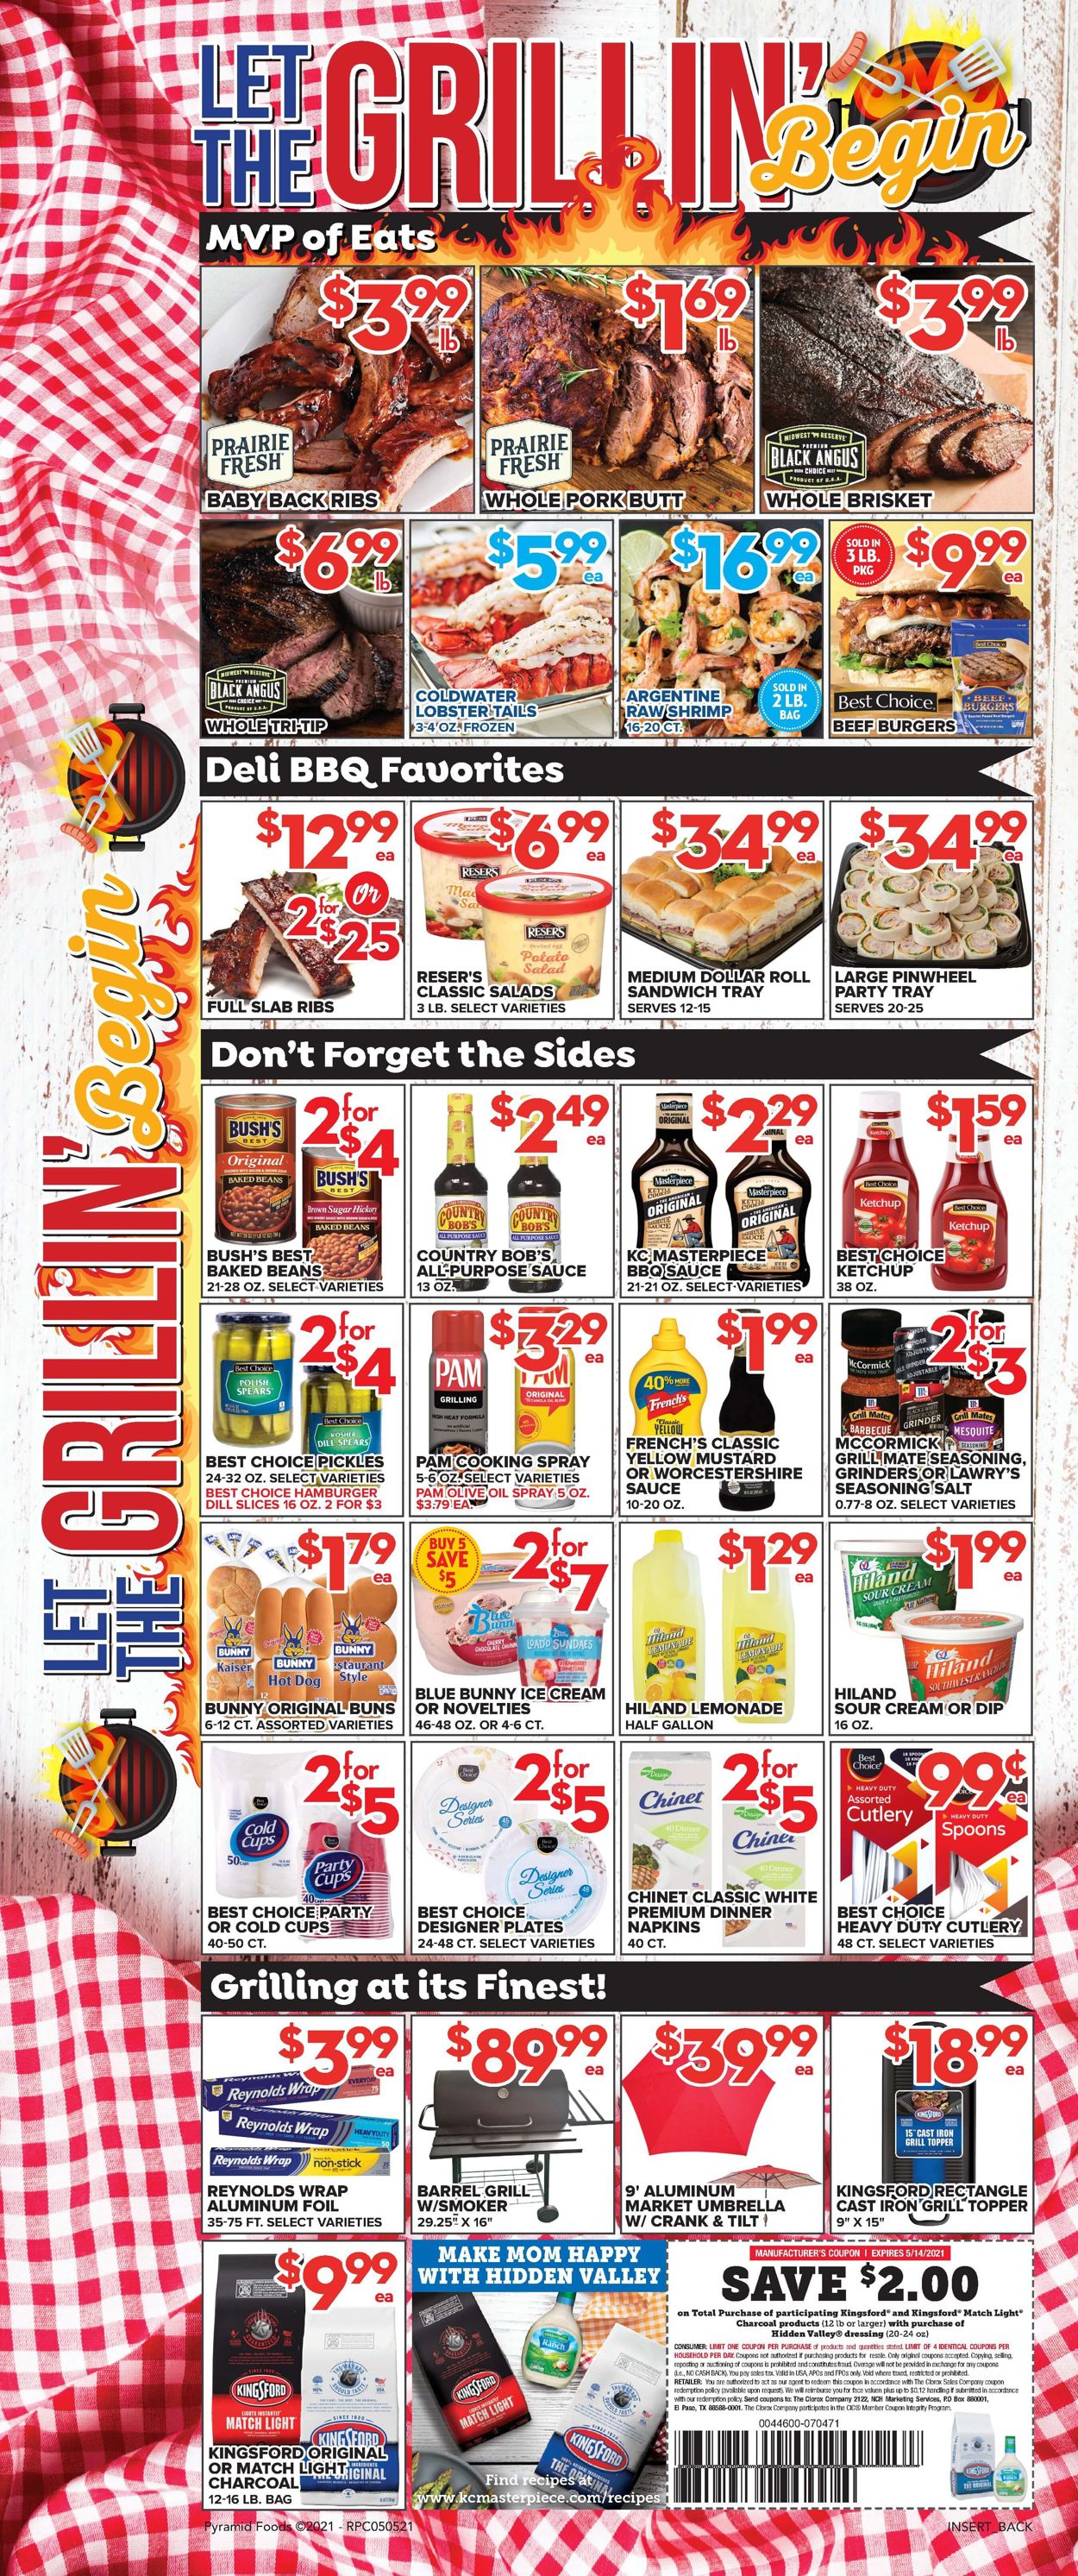 Price Cutter Weekly Ad Circular - valid 05/05-05/11/2021 (Page 6)